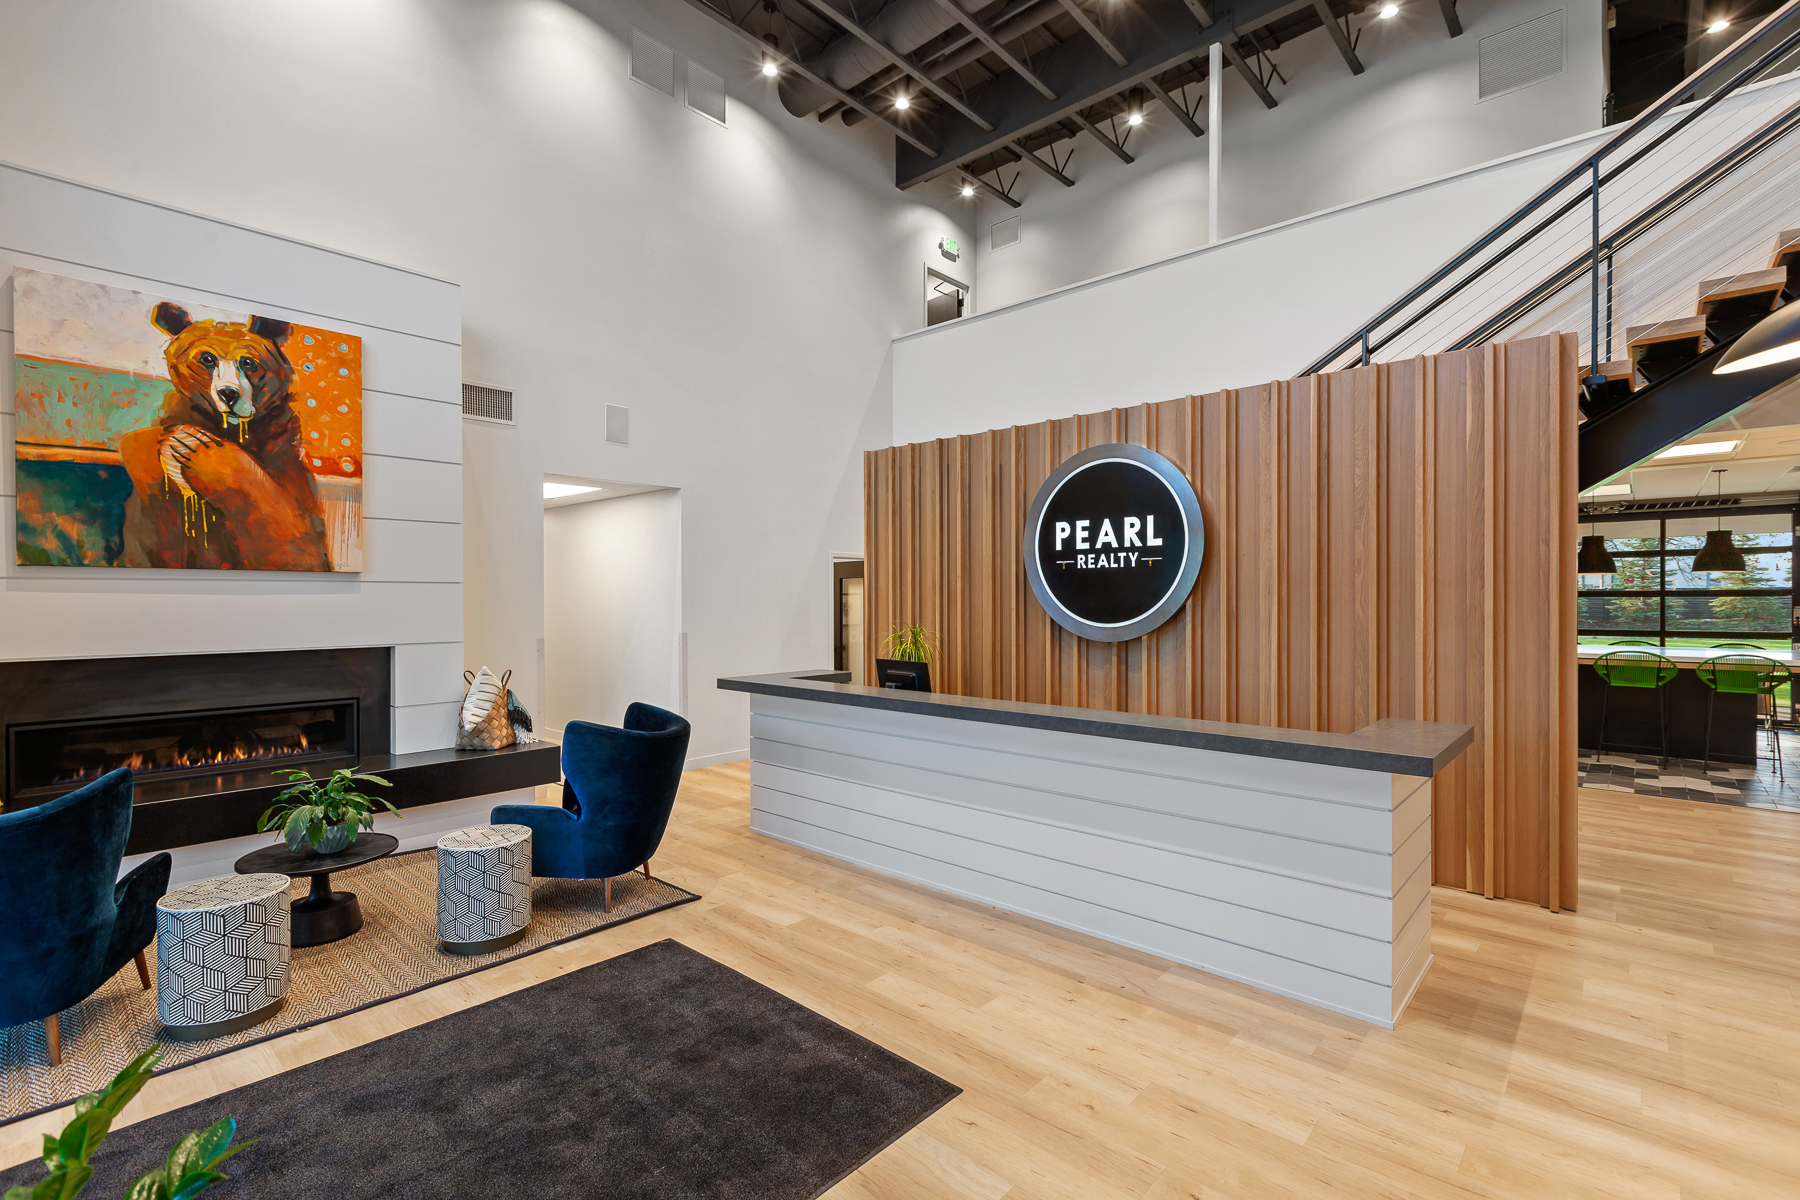 Pearl Realty Front Desk with logo